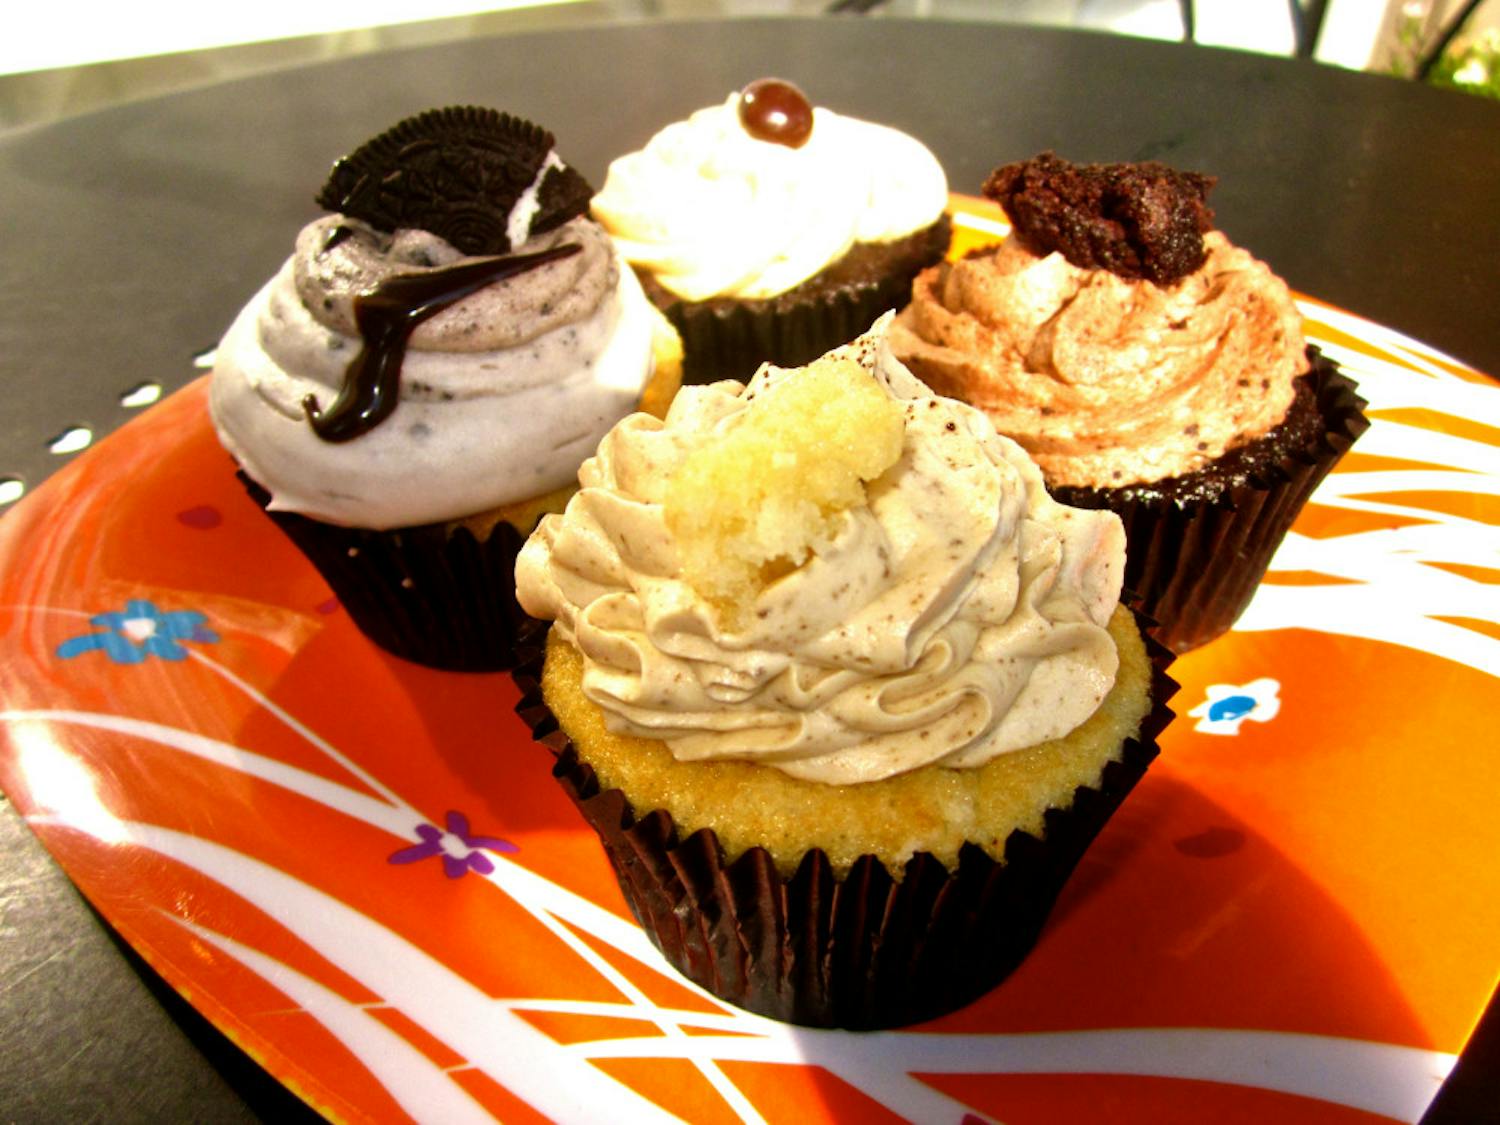 Four cupcakes (clockwise from back): Espresso, Chocolate Explosion, Caramel Latte and Oreo